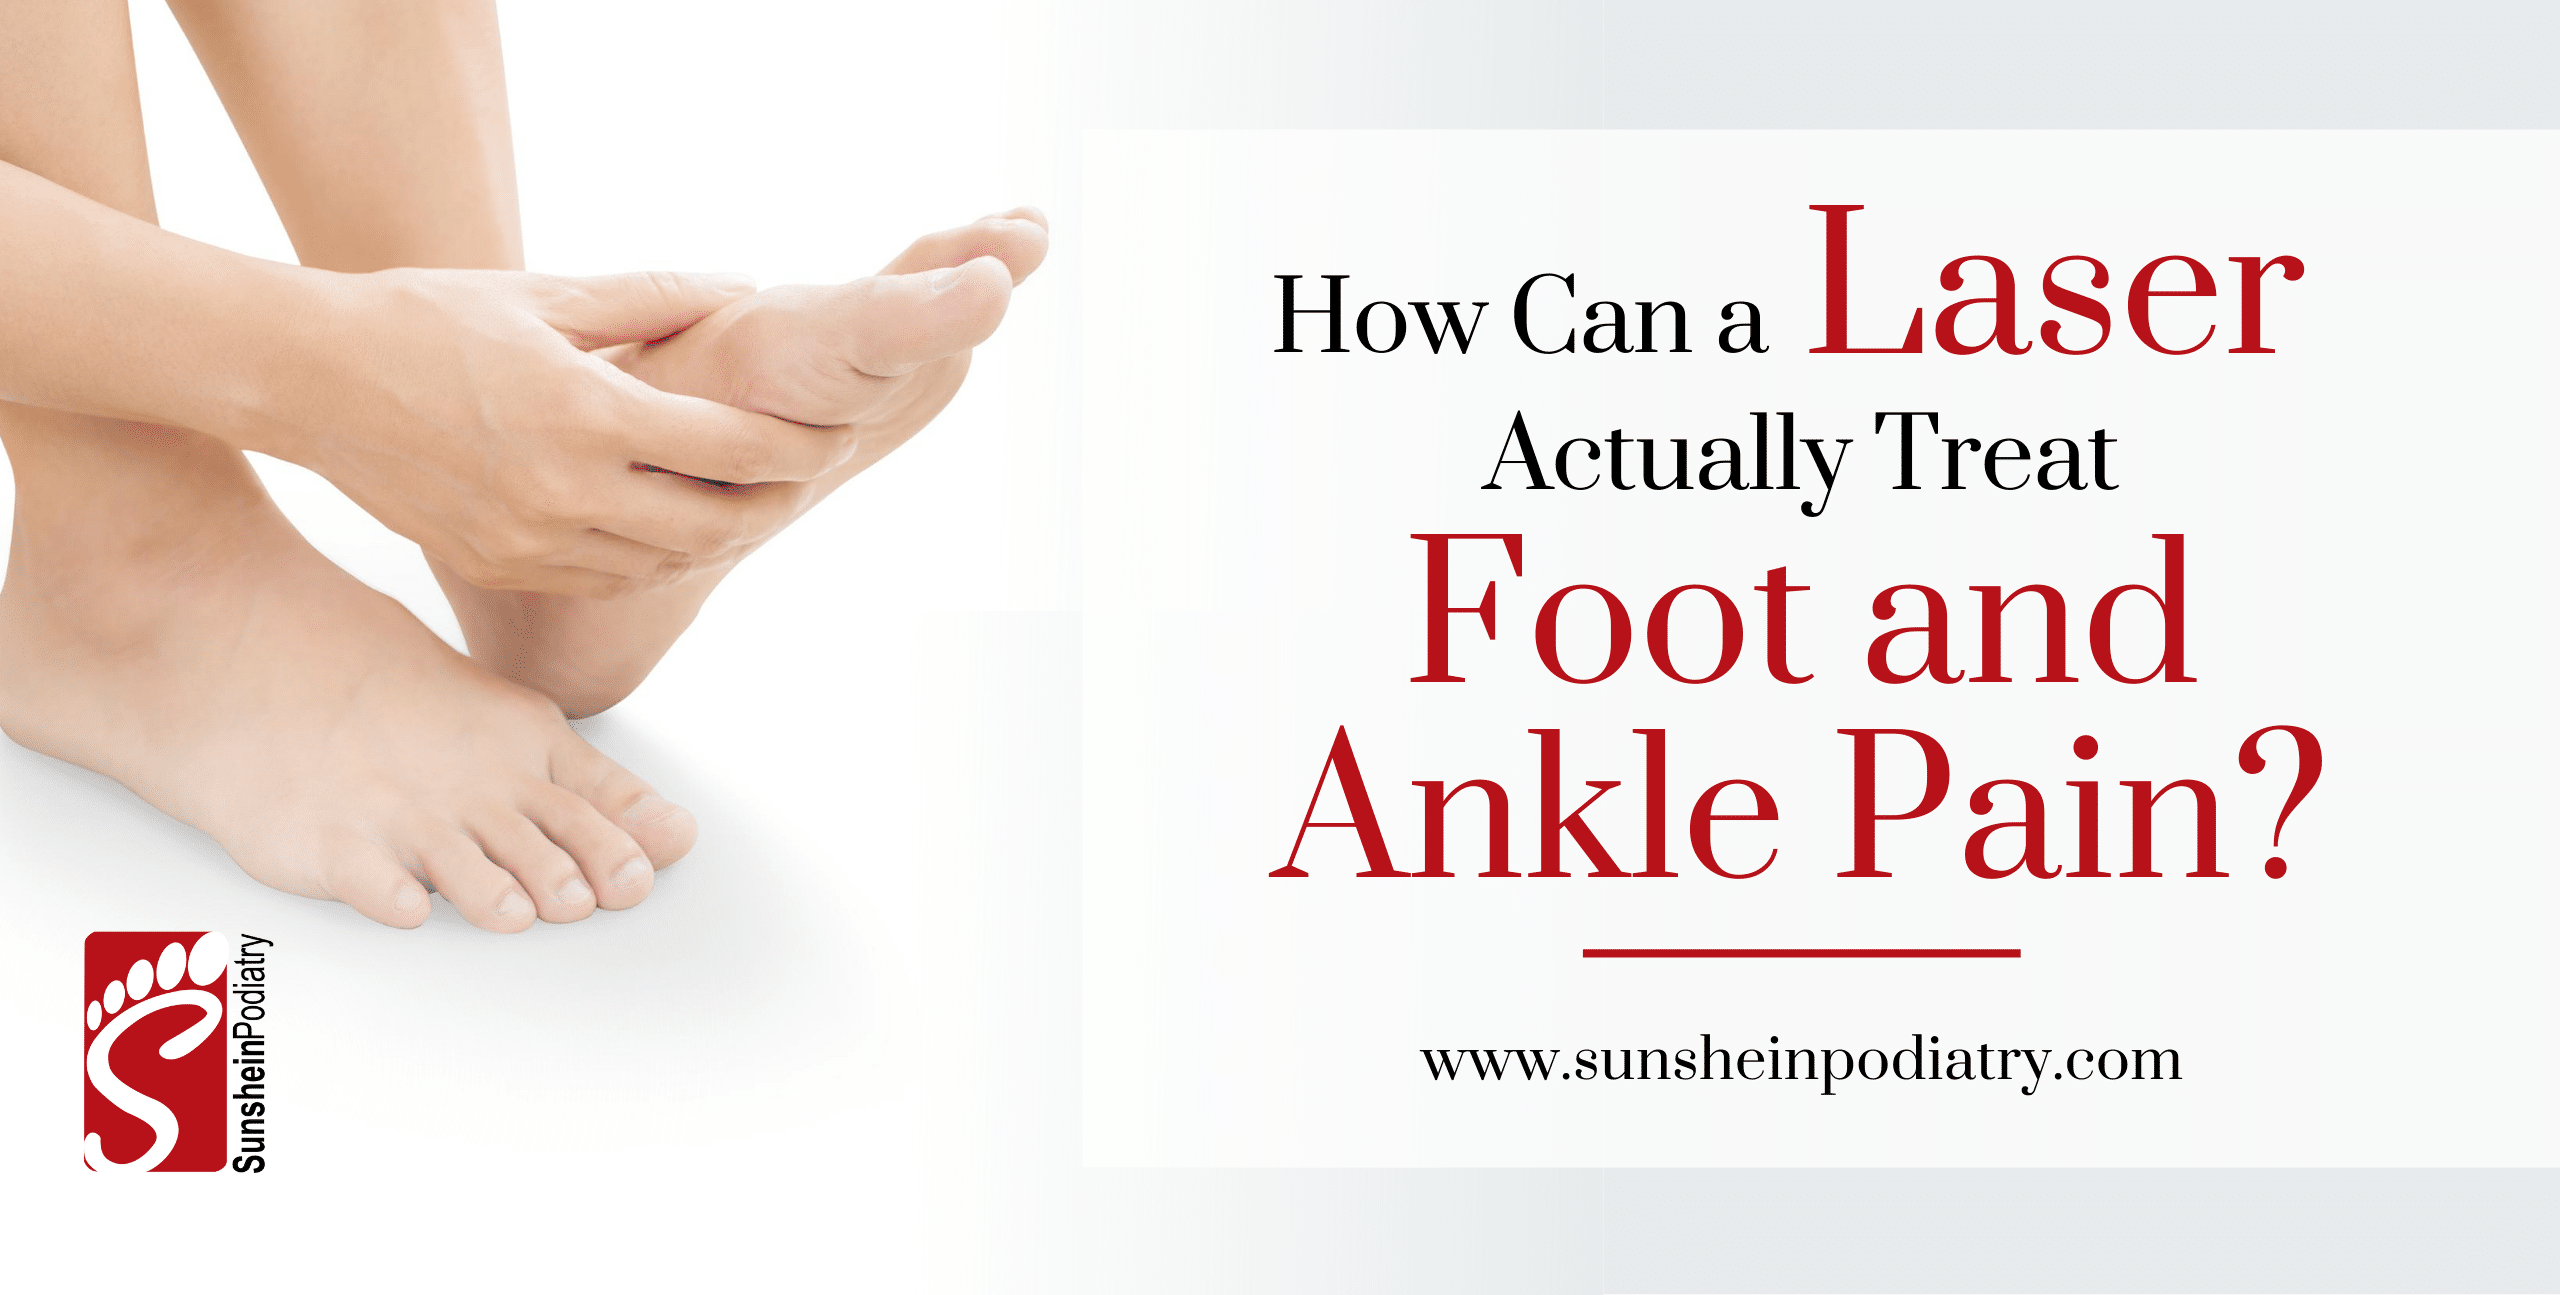 How Can a Laser Actually Treat Foot and Ankle Pain?